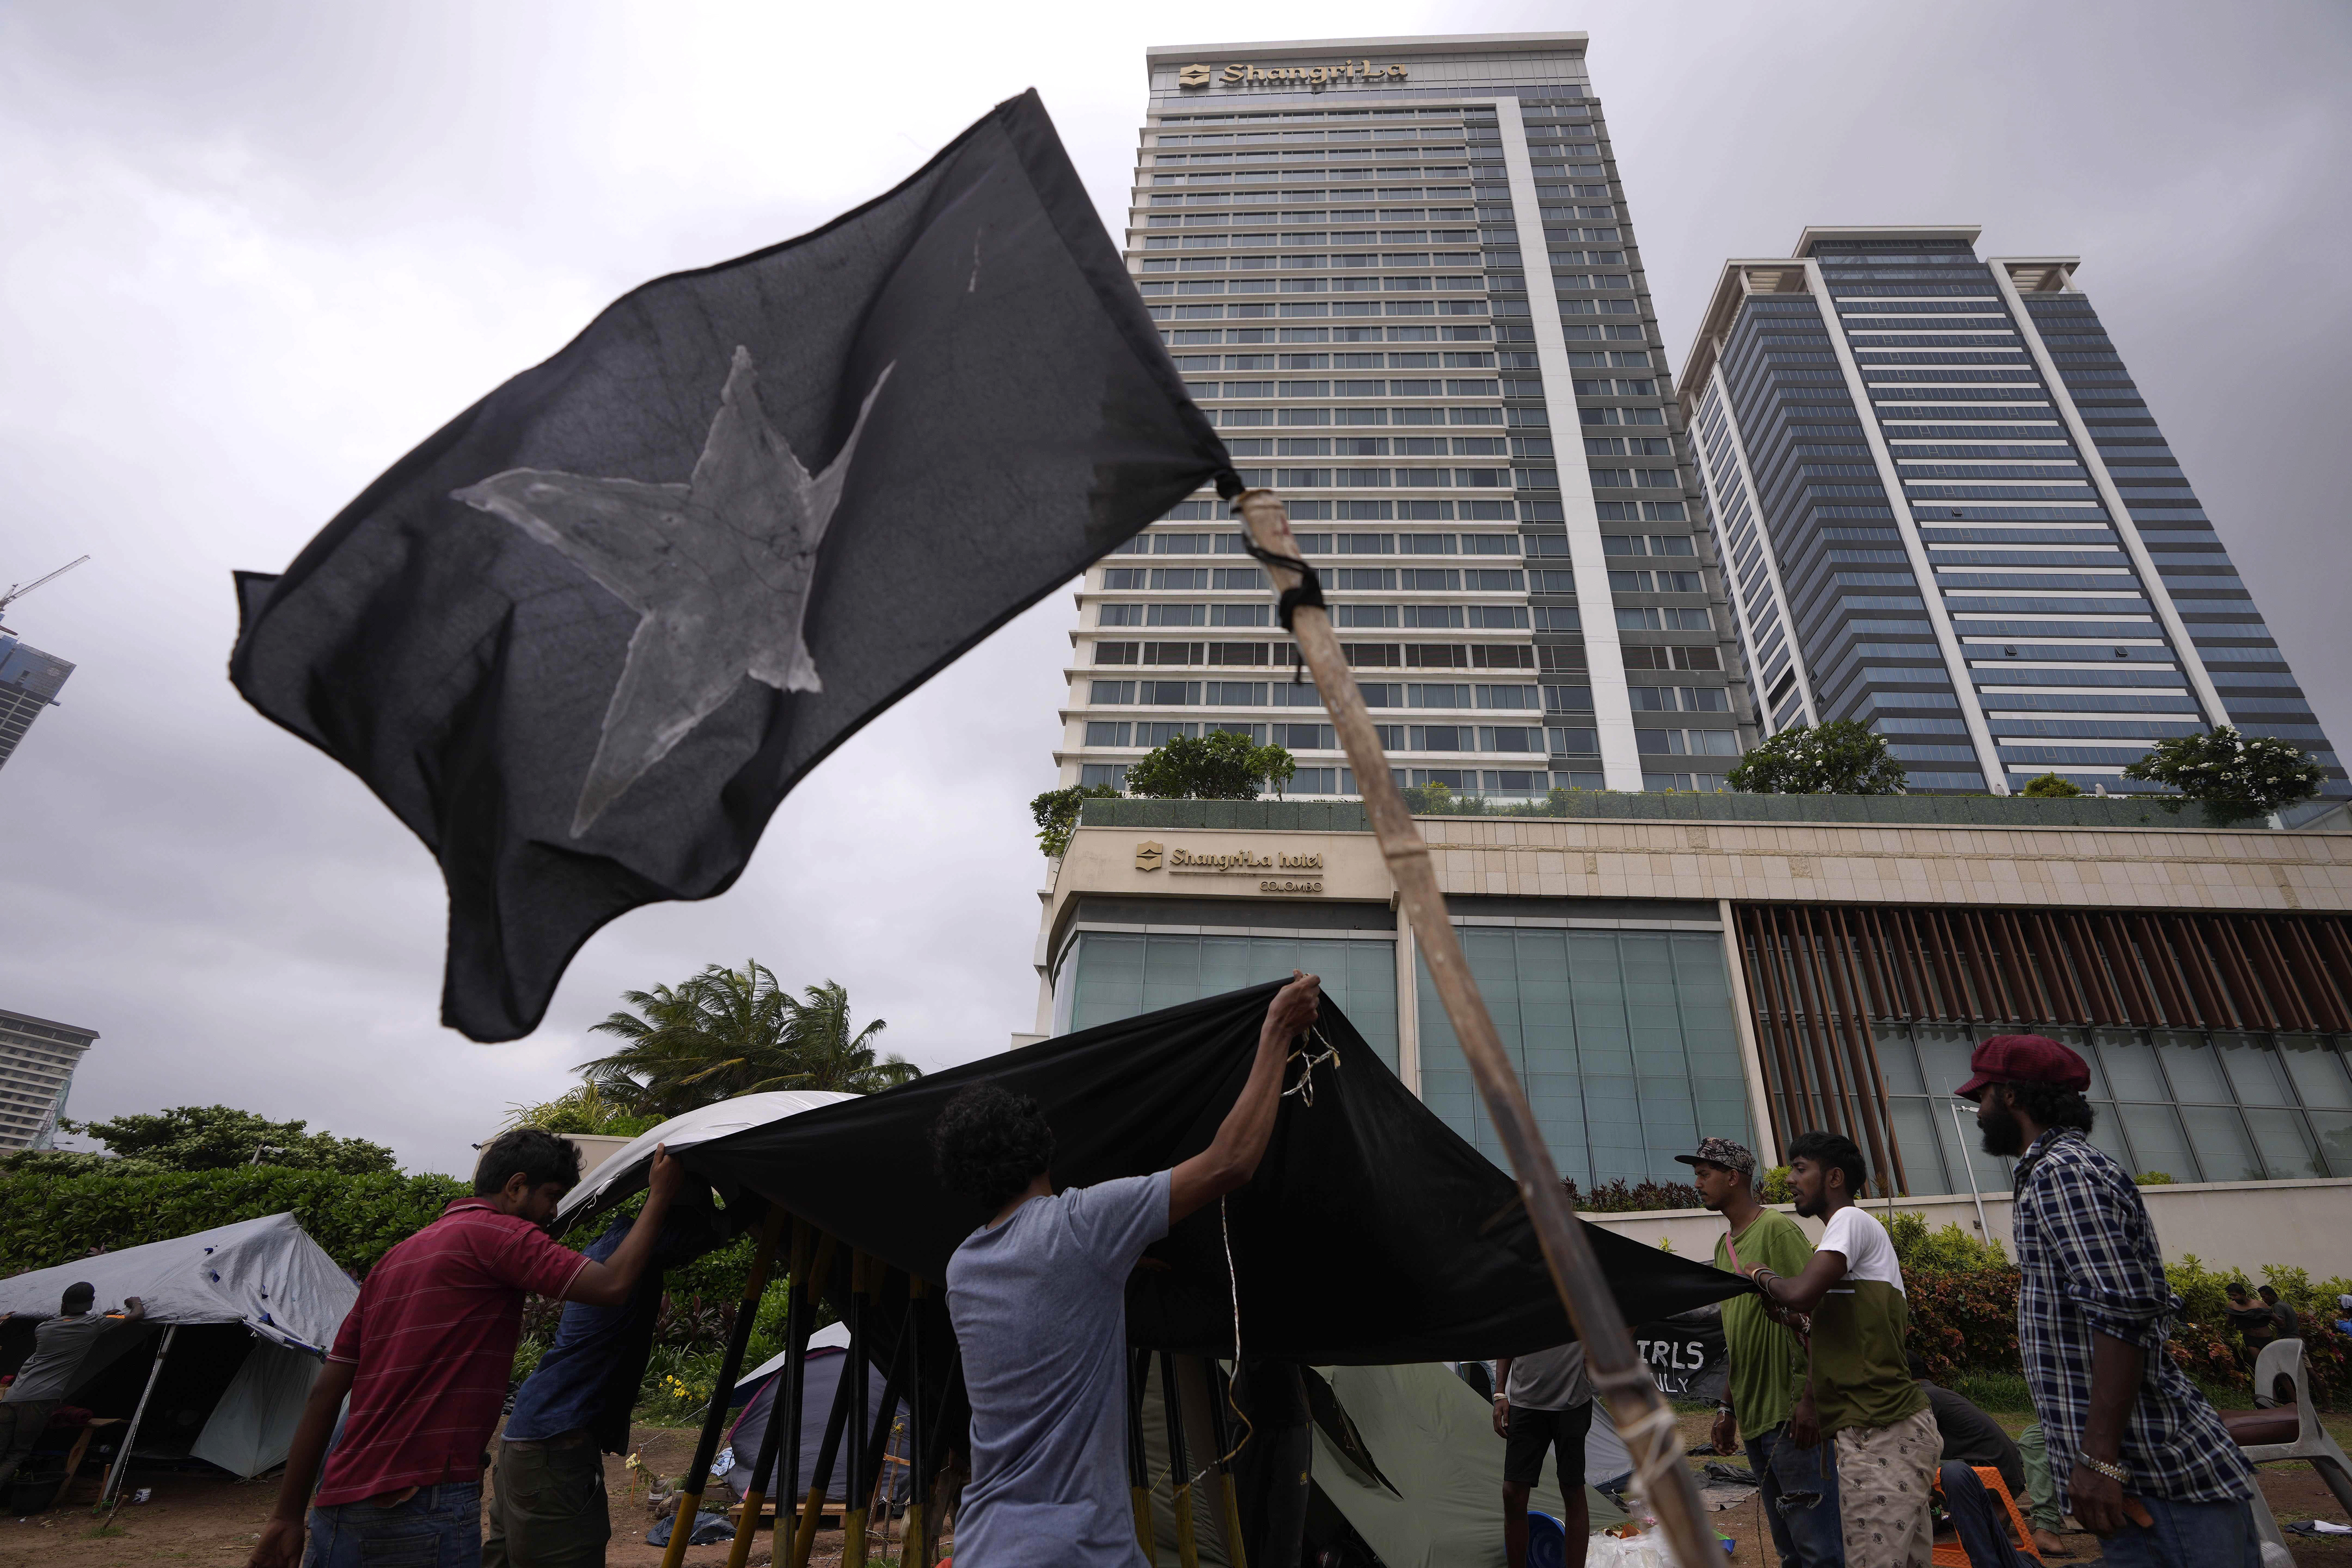 Sri Lankan anti-government protesters mend a tent at the ongoing protest site a day after it was attacked by government supporters in Colombo.